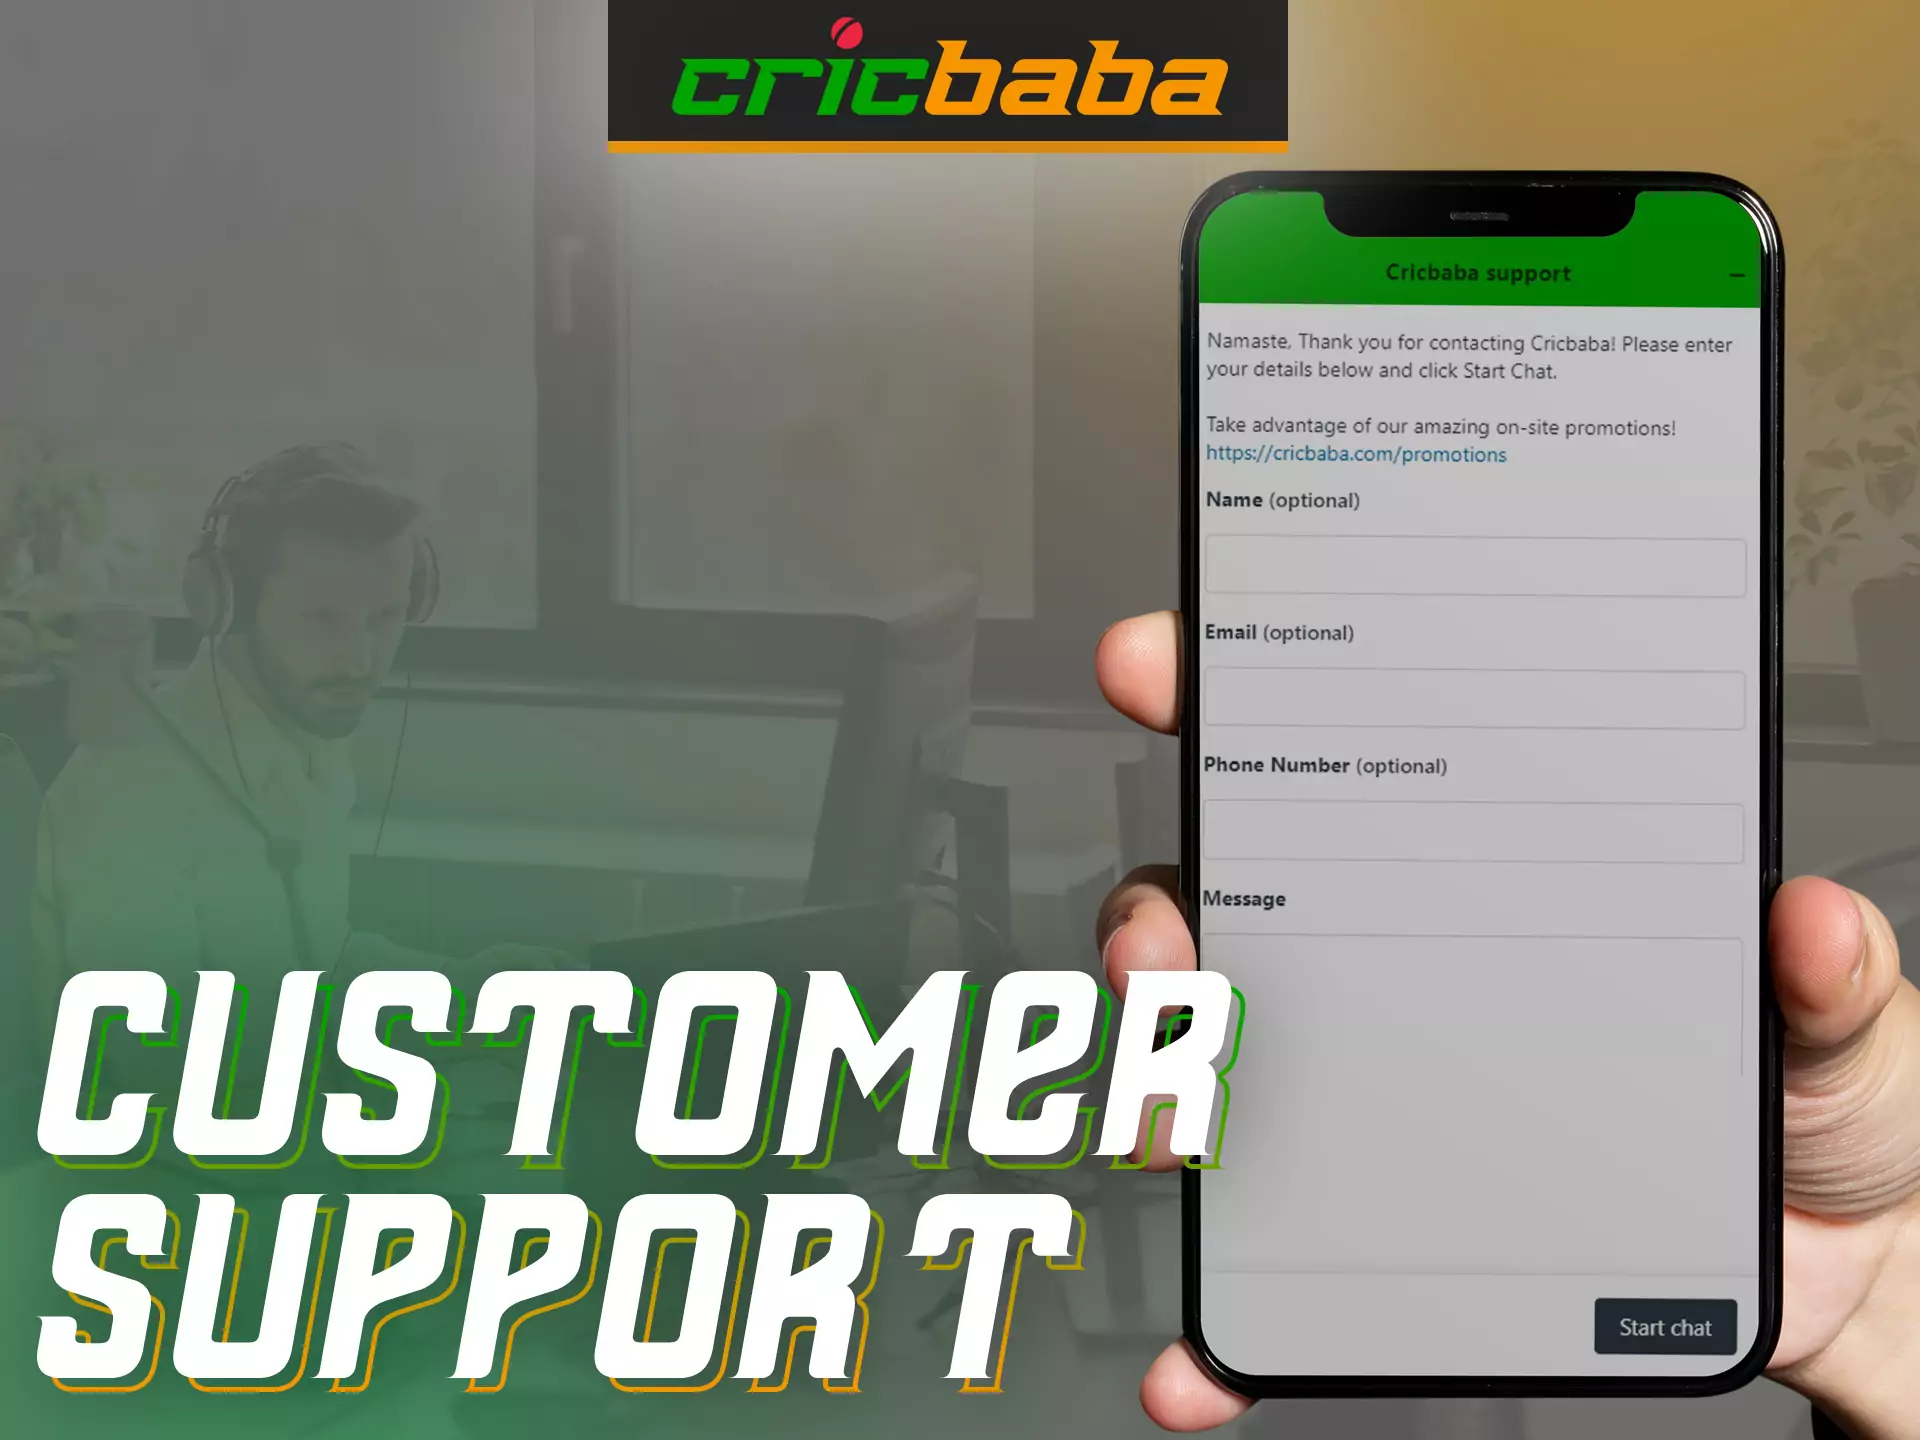 Cricbaba supports its users all the time, answers all questions.